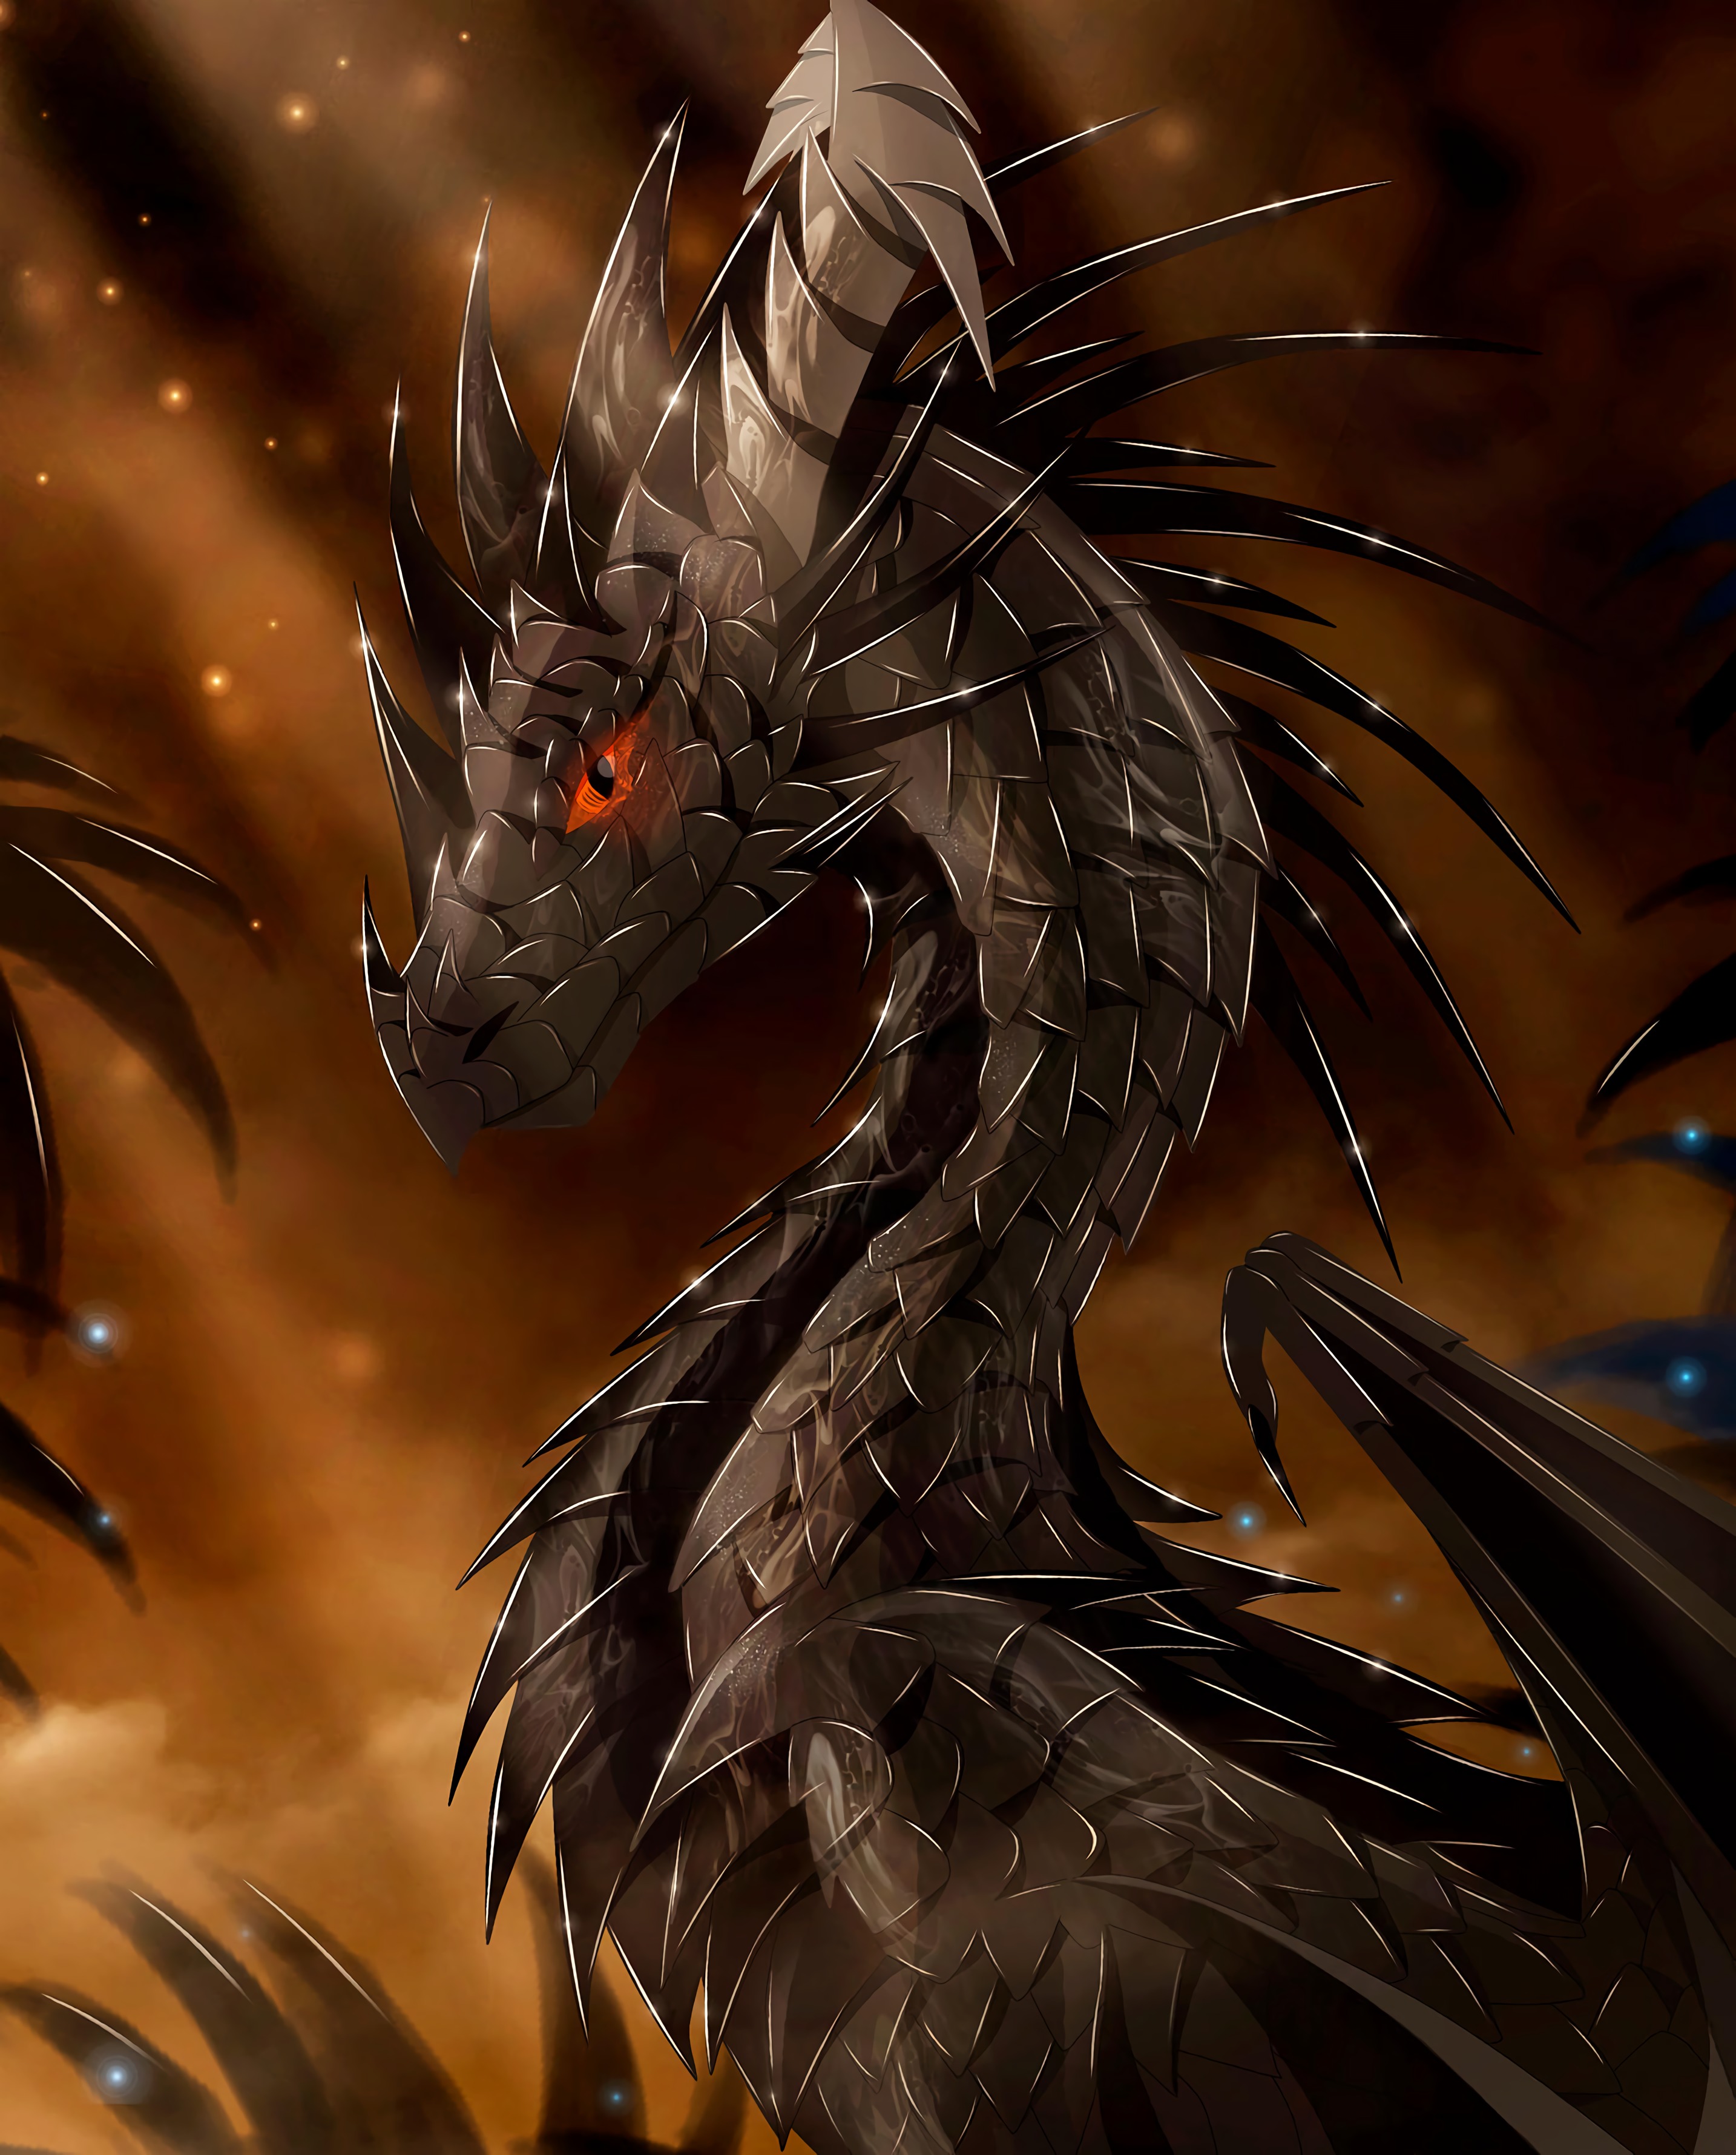 that's incredible, art, sight, opinion, dragon, being, creature, fiction lock screen backgrounds